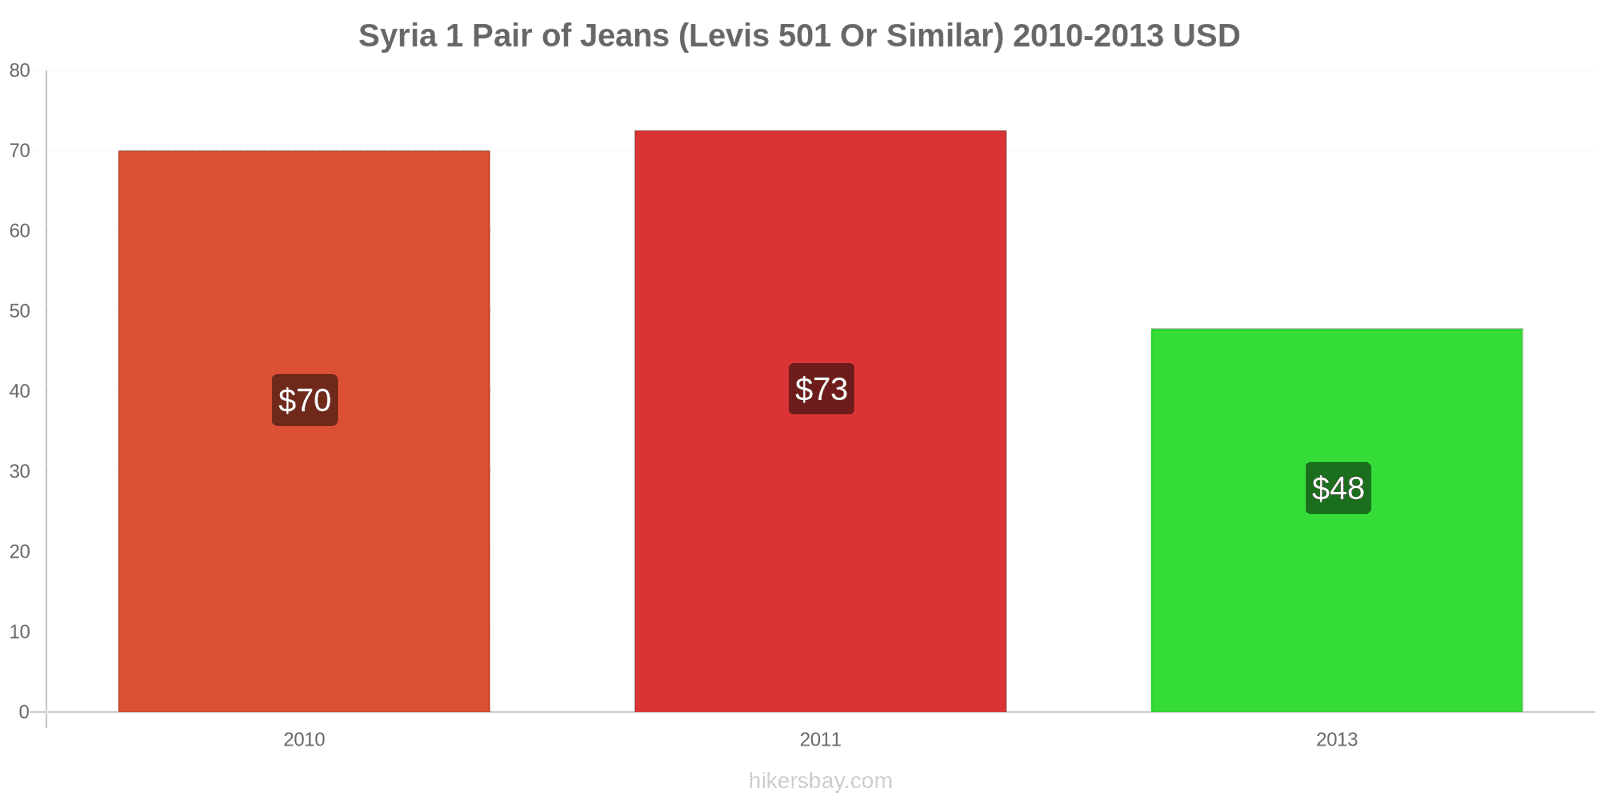 Syria price changes 1 pair of jeans (Levis 501 or similar) hikersbay.com